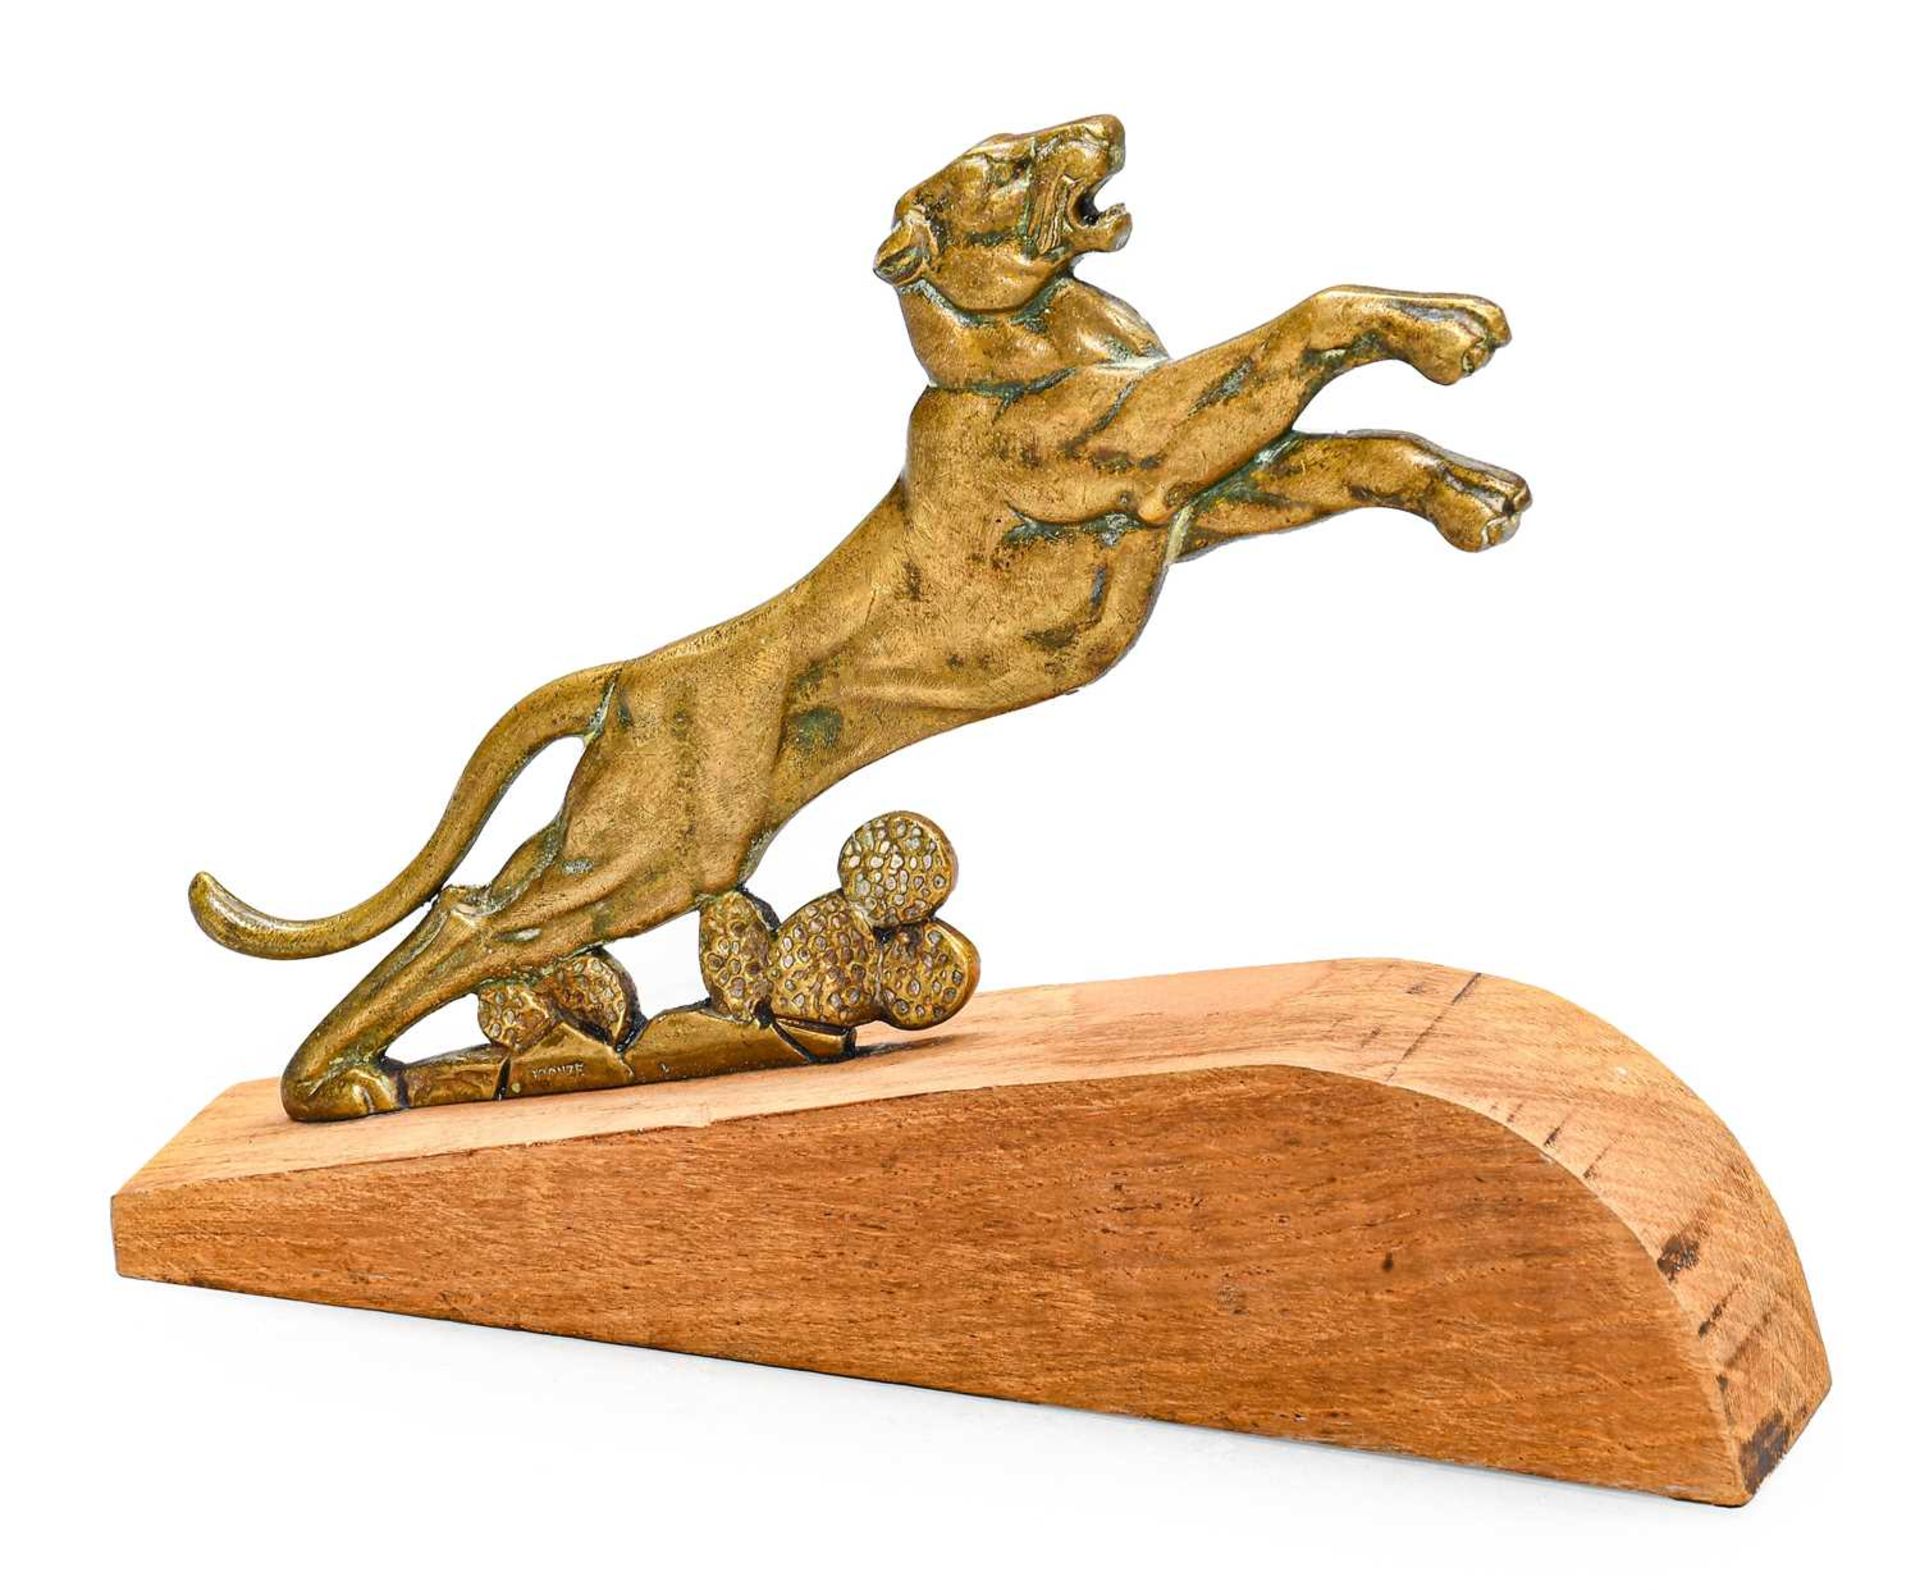 A Bronzed Accessory Mascot, as an outstretched lion, mounted on a wooden base